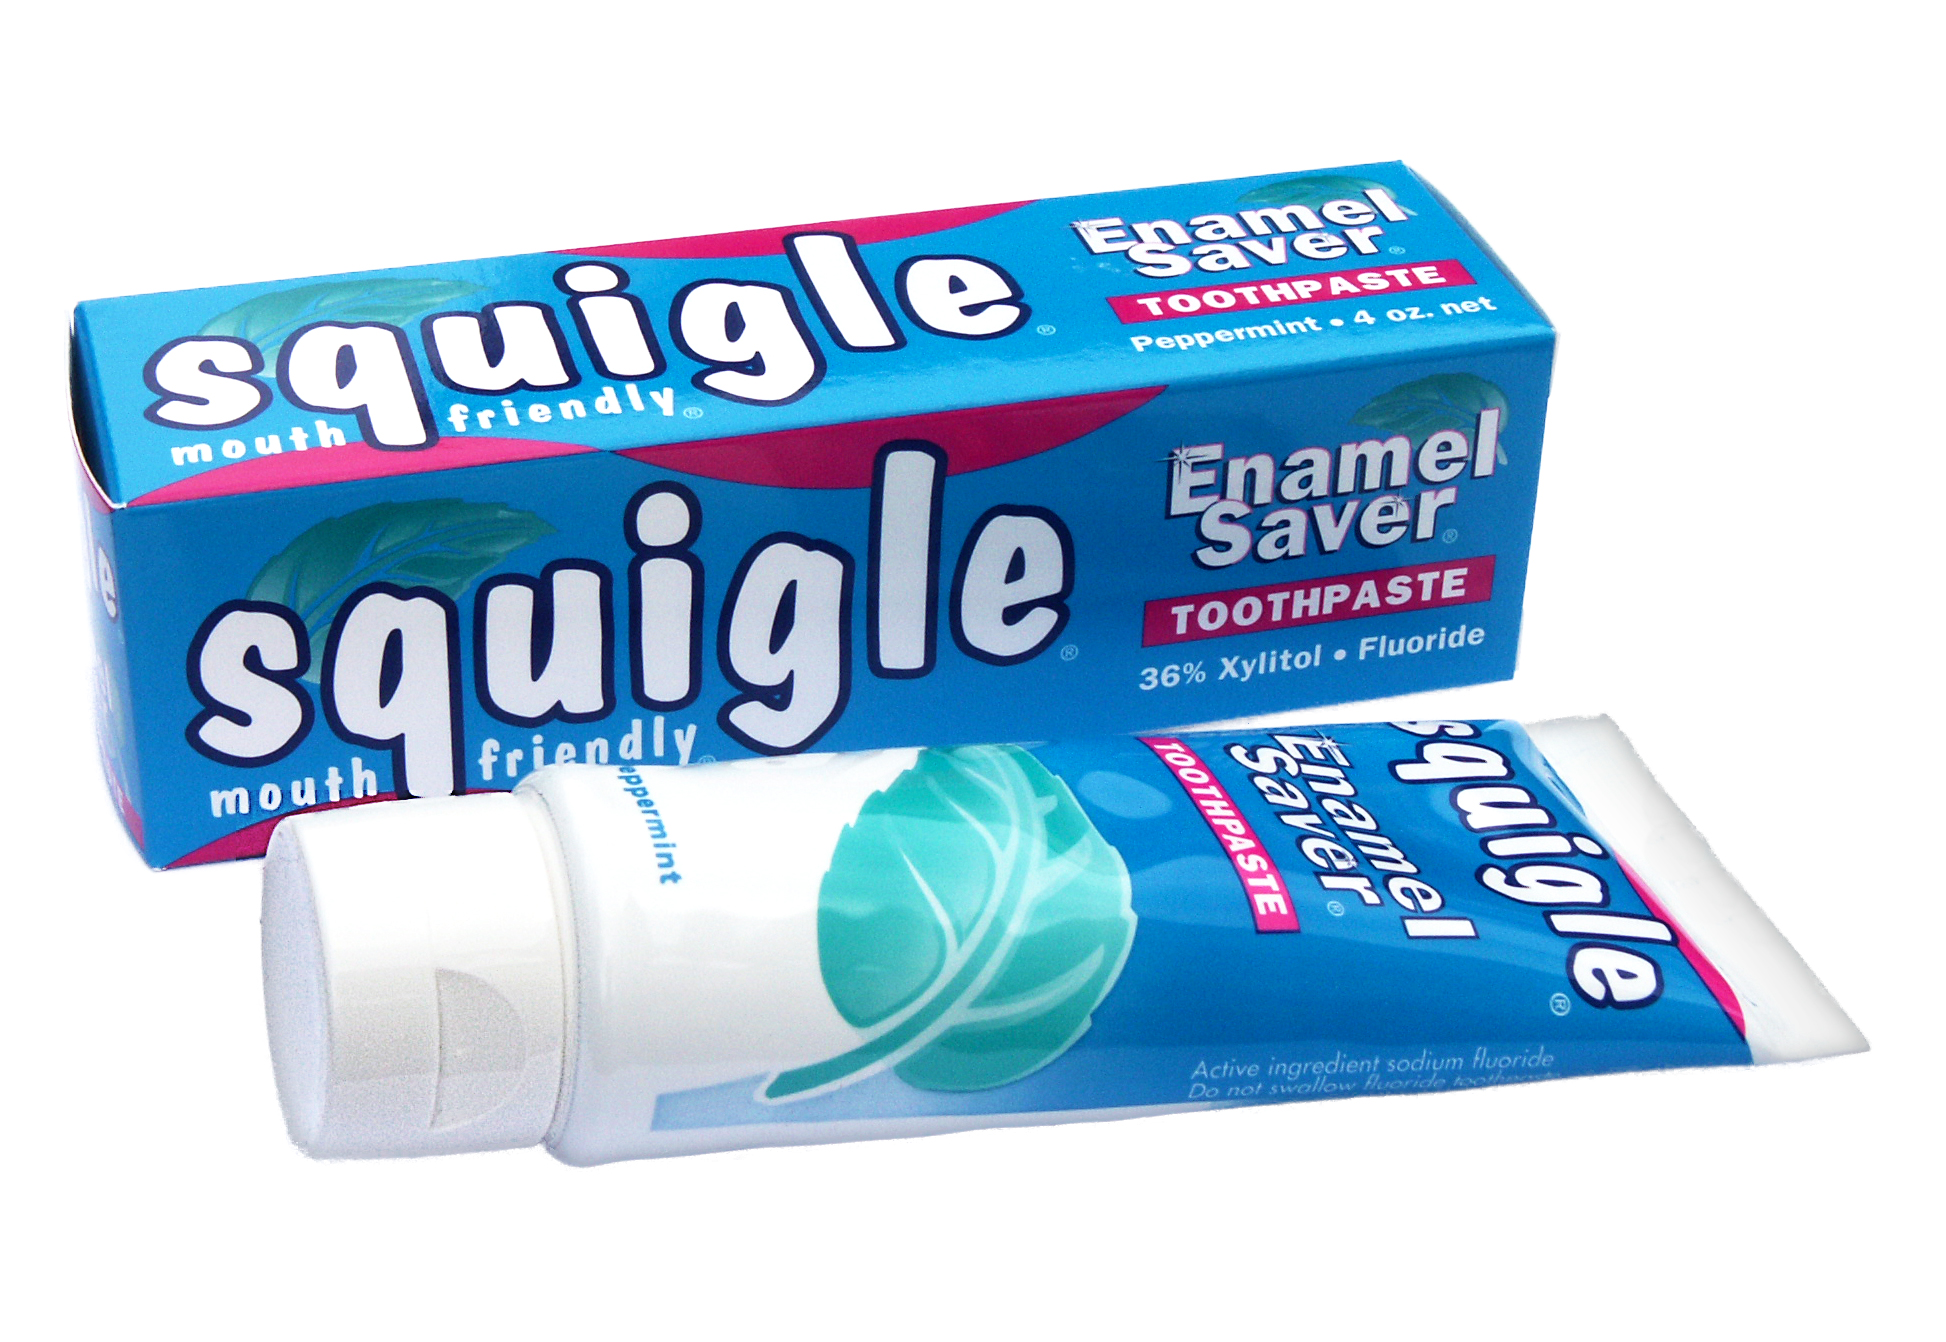 Squigle tooth paste, canker sores, dry mouth, mouth ulcers, gum disease, oral mucositis, sensitive teeth, perioral dermatitis